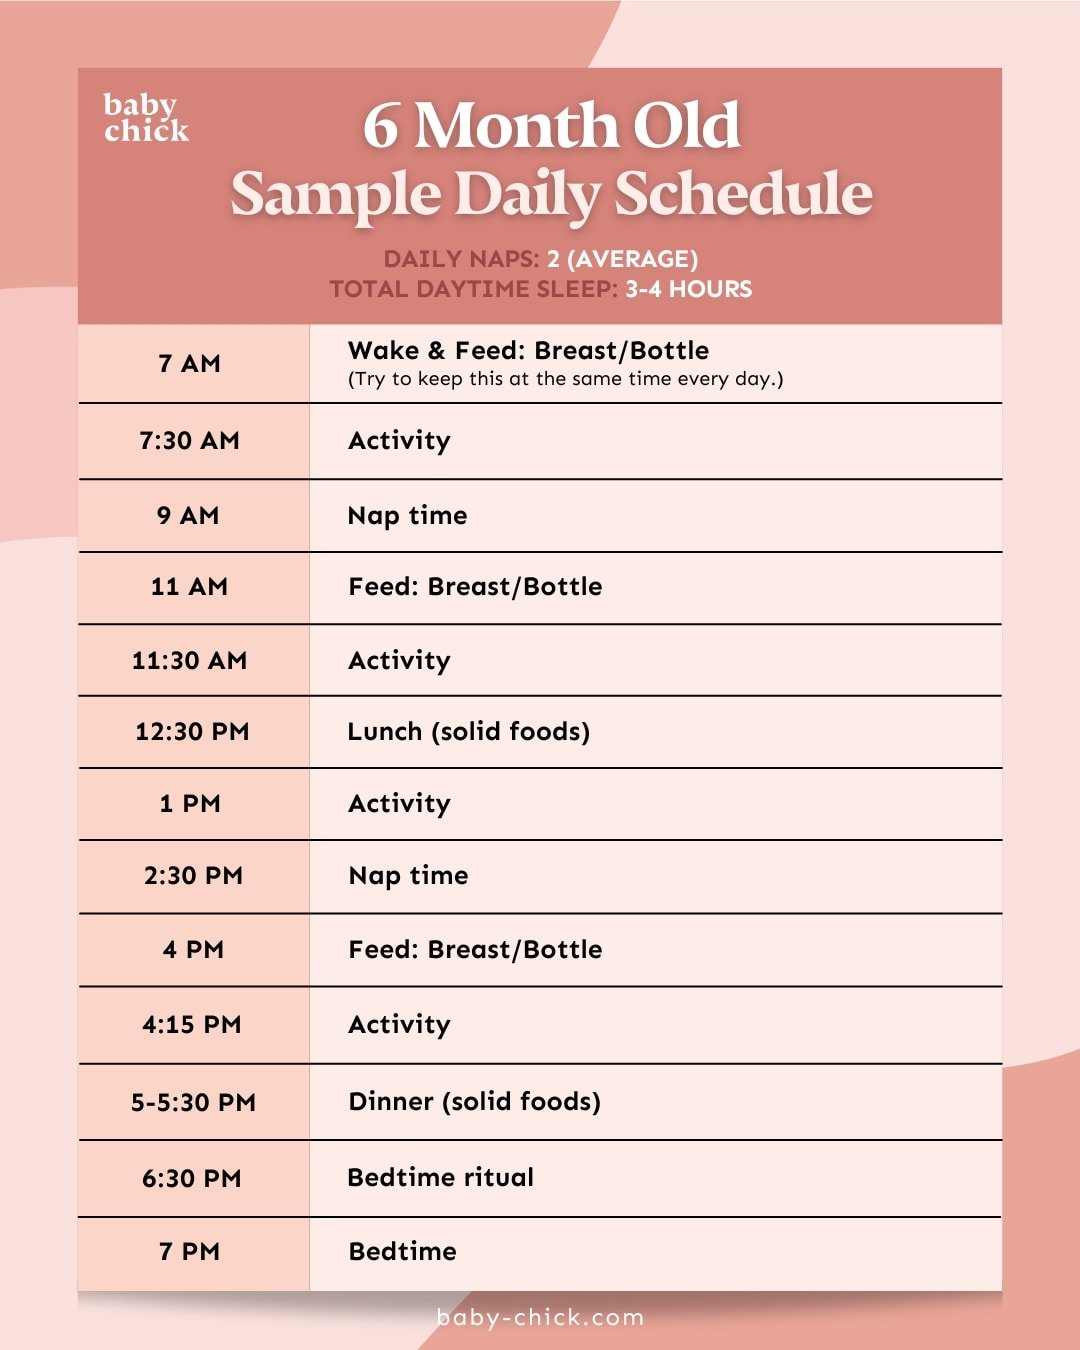 6 month old sample daily schedule graphic